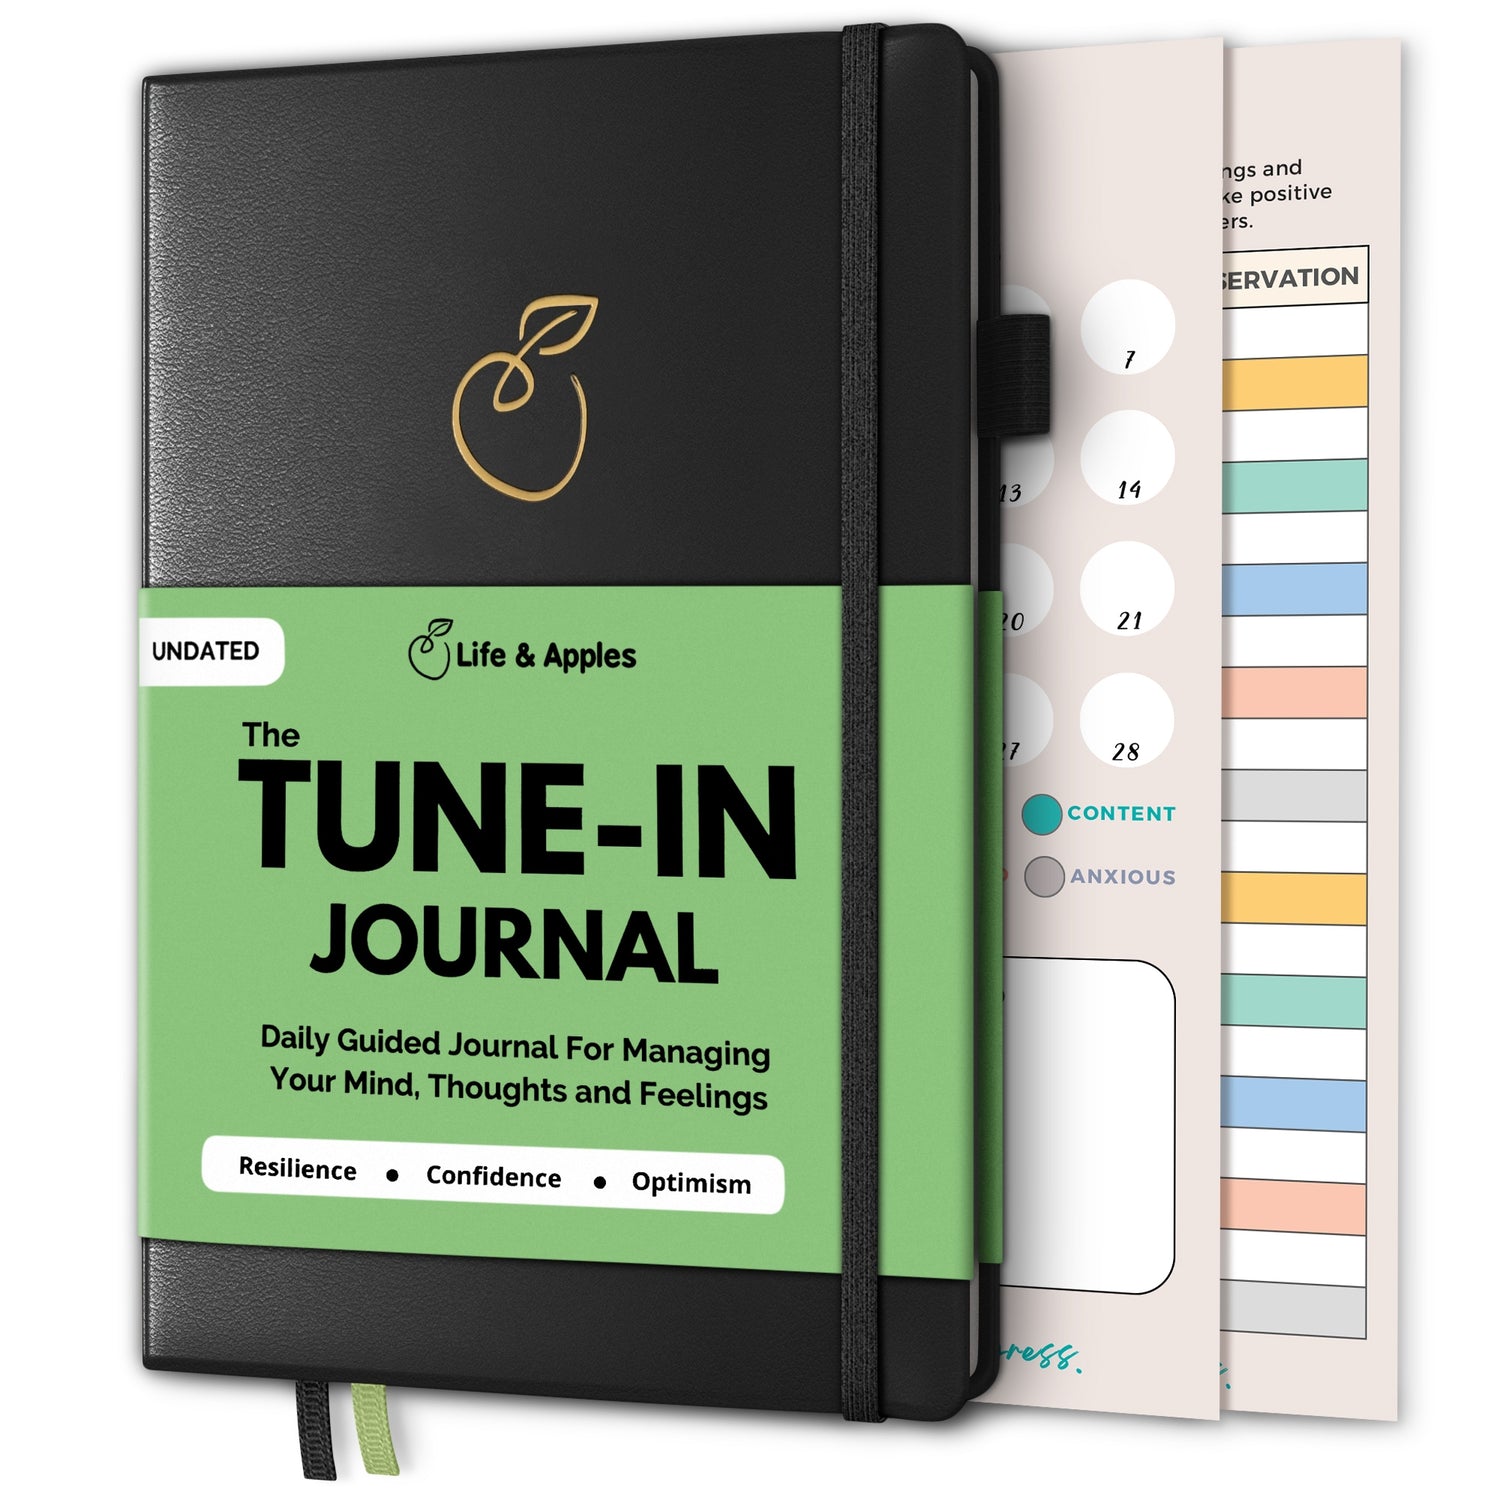 Tune-in Journal - Life & Apples